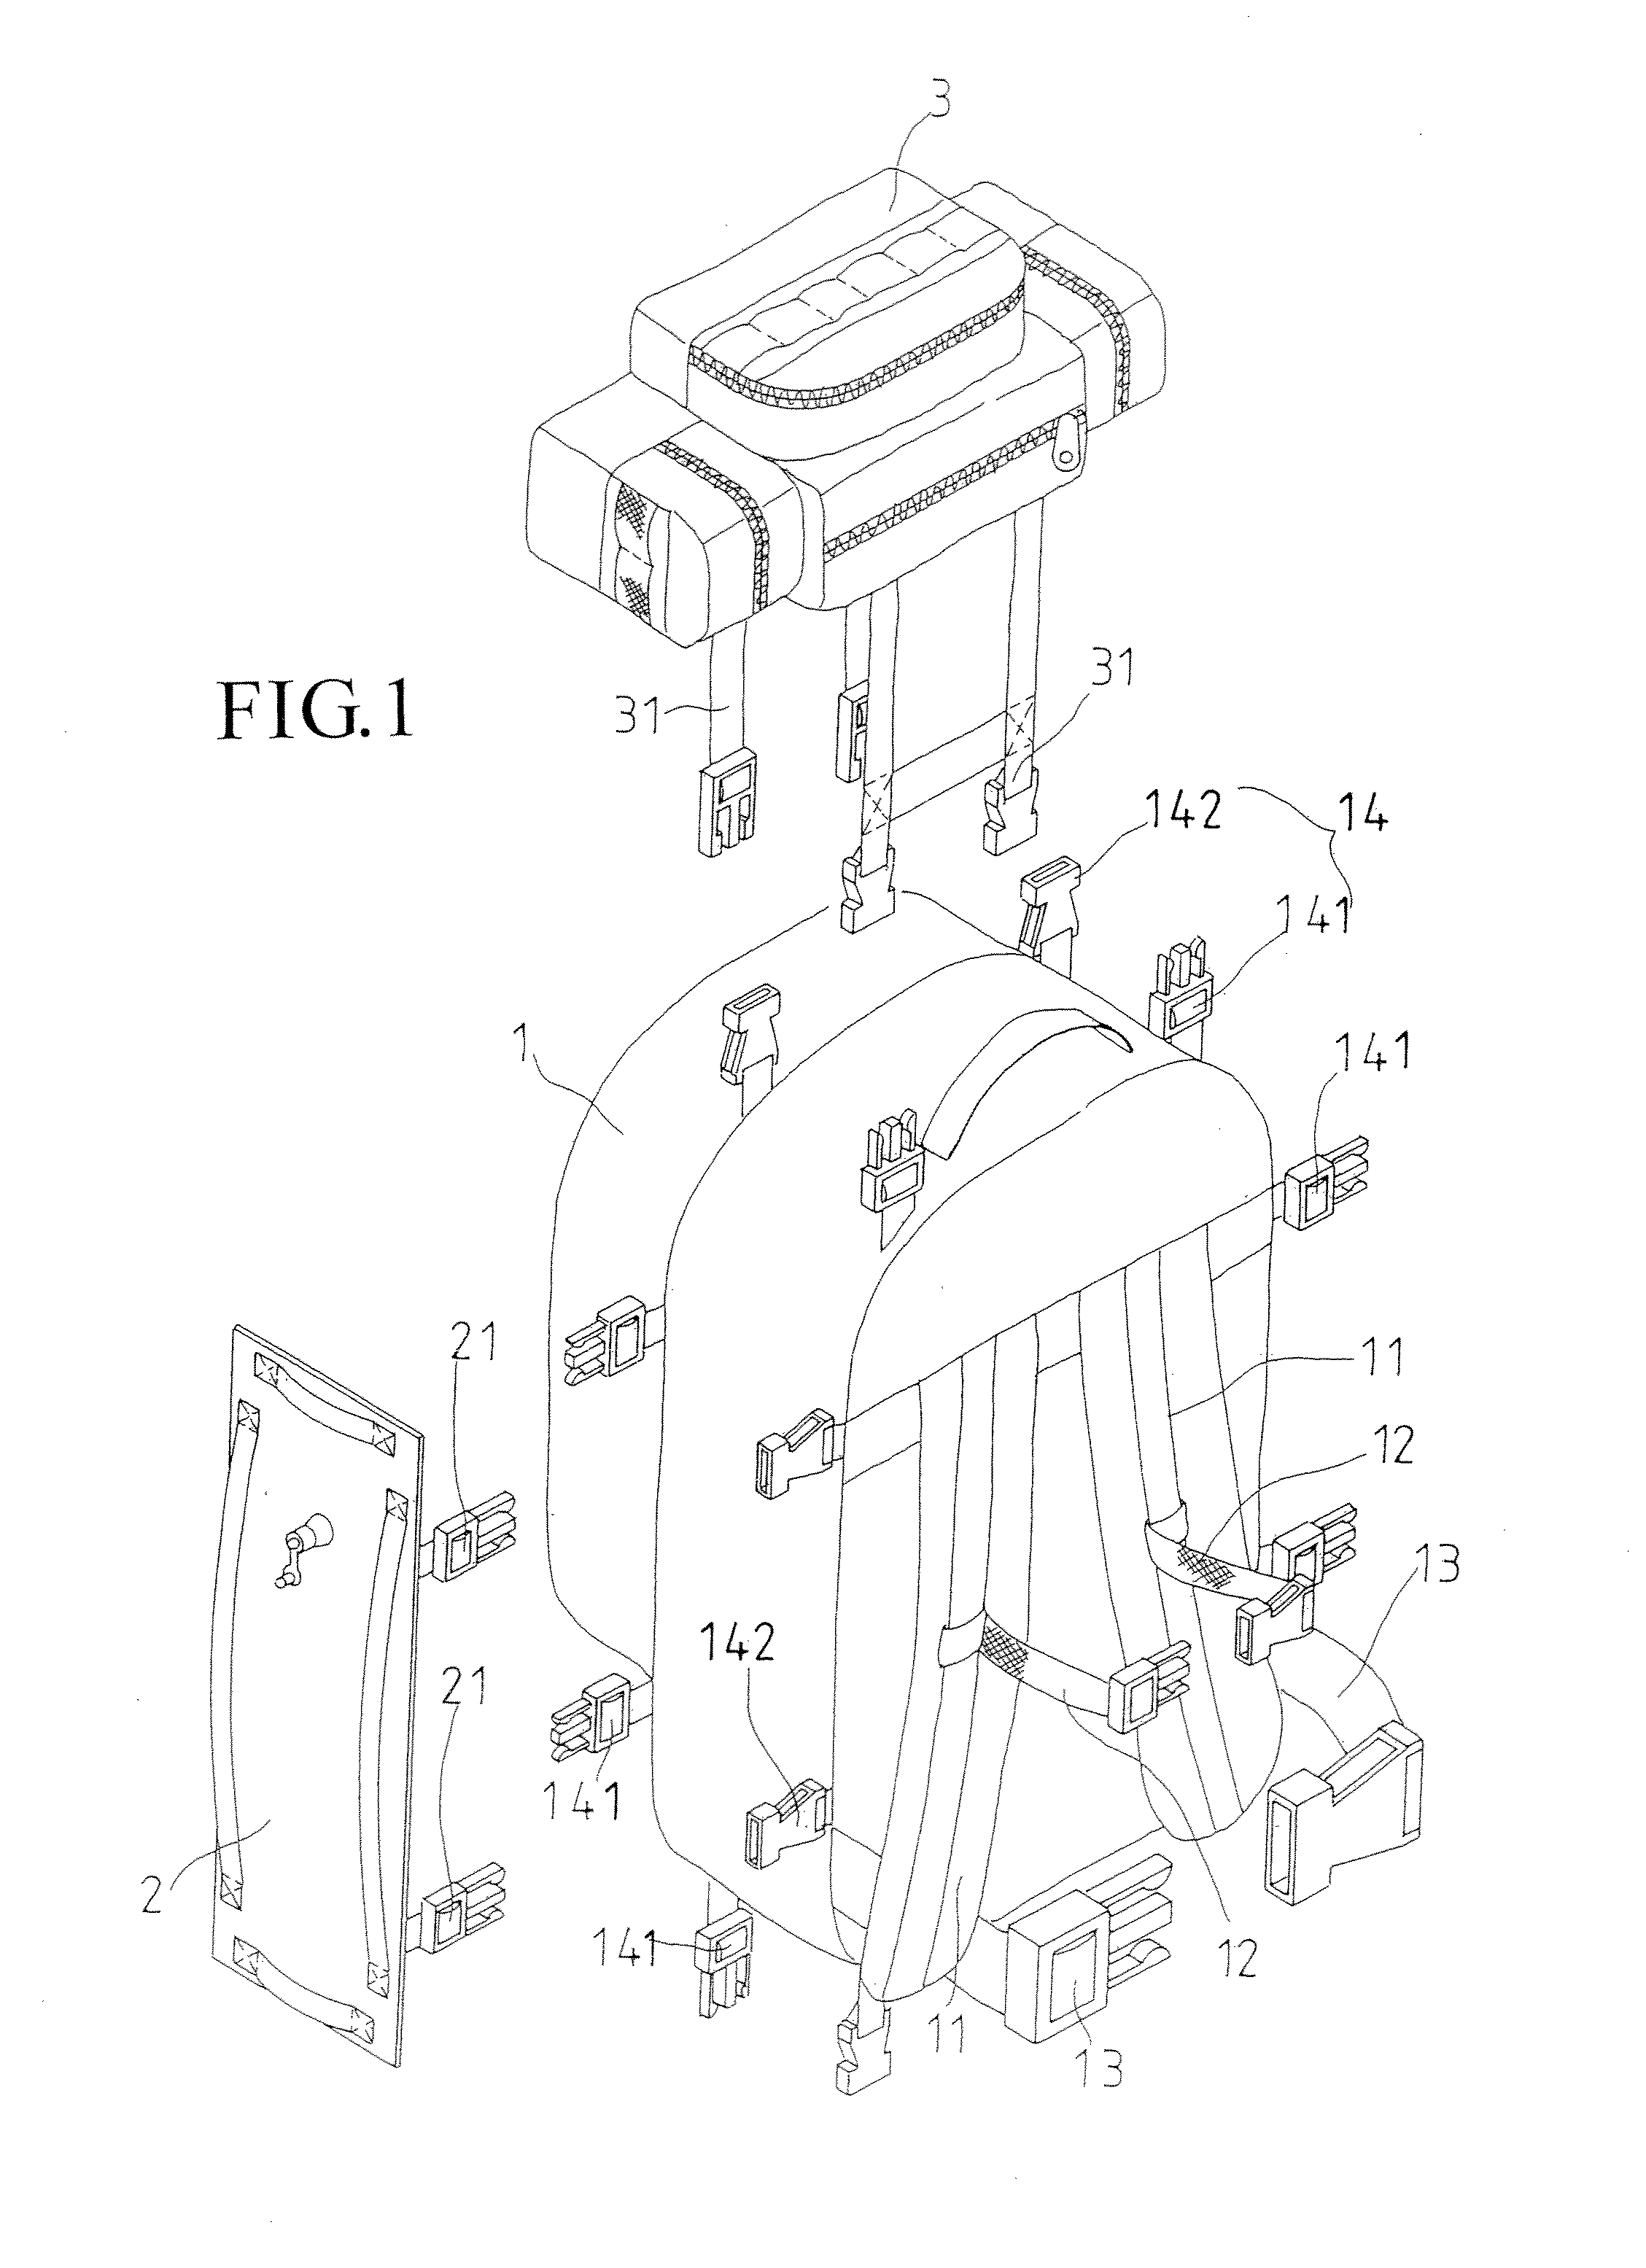 Backpack structure having lifesaving function